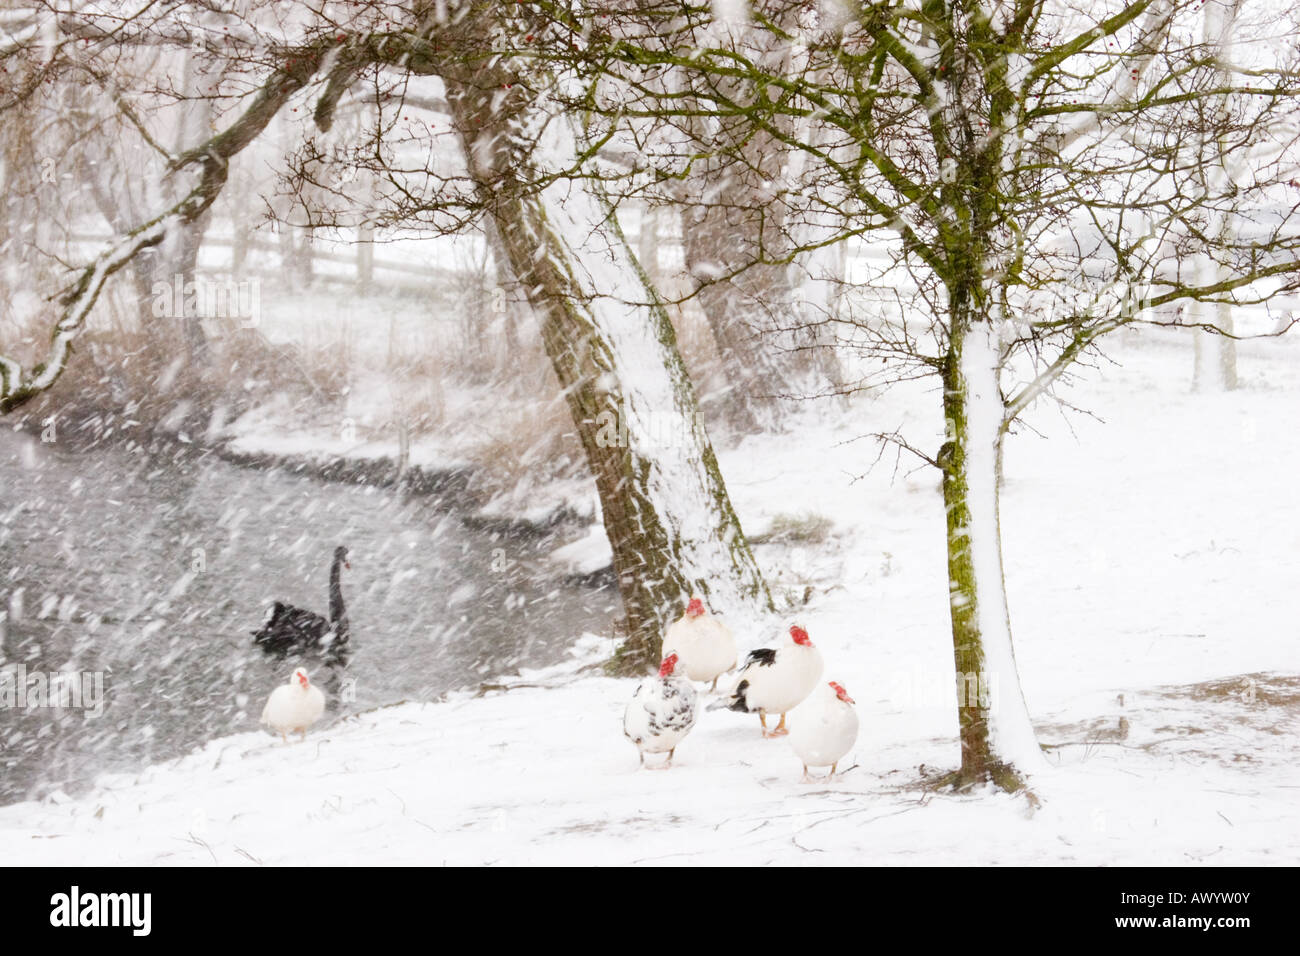 Muscovy ducks, Cairina moschata, outside in the snow, in winter Stock Photo